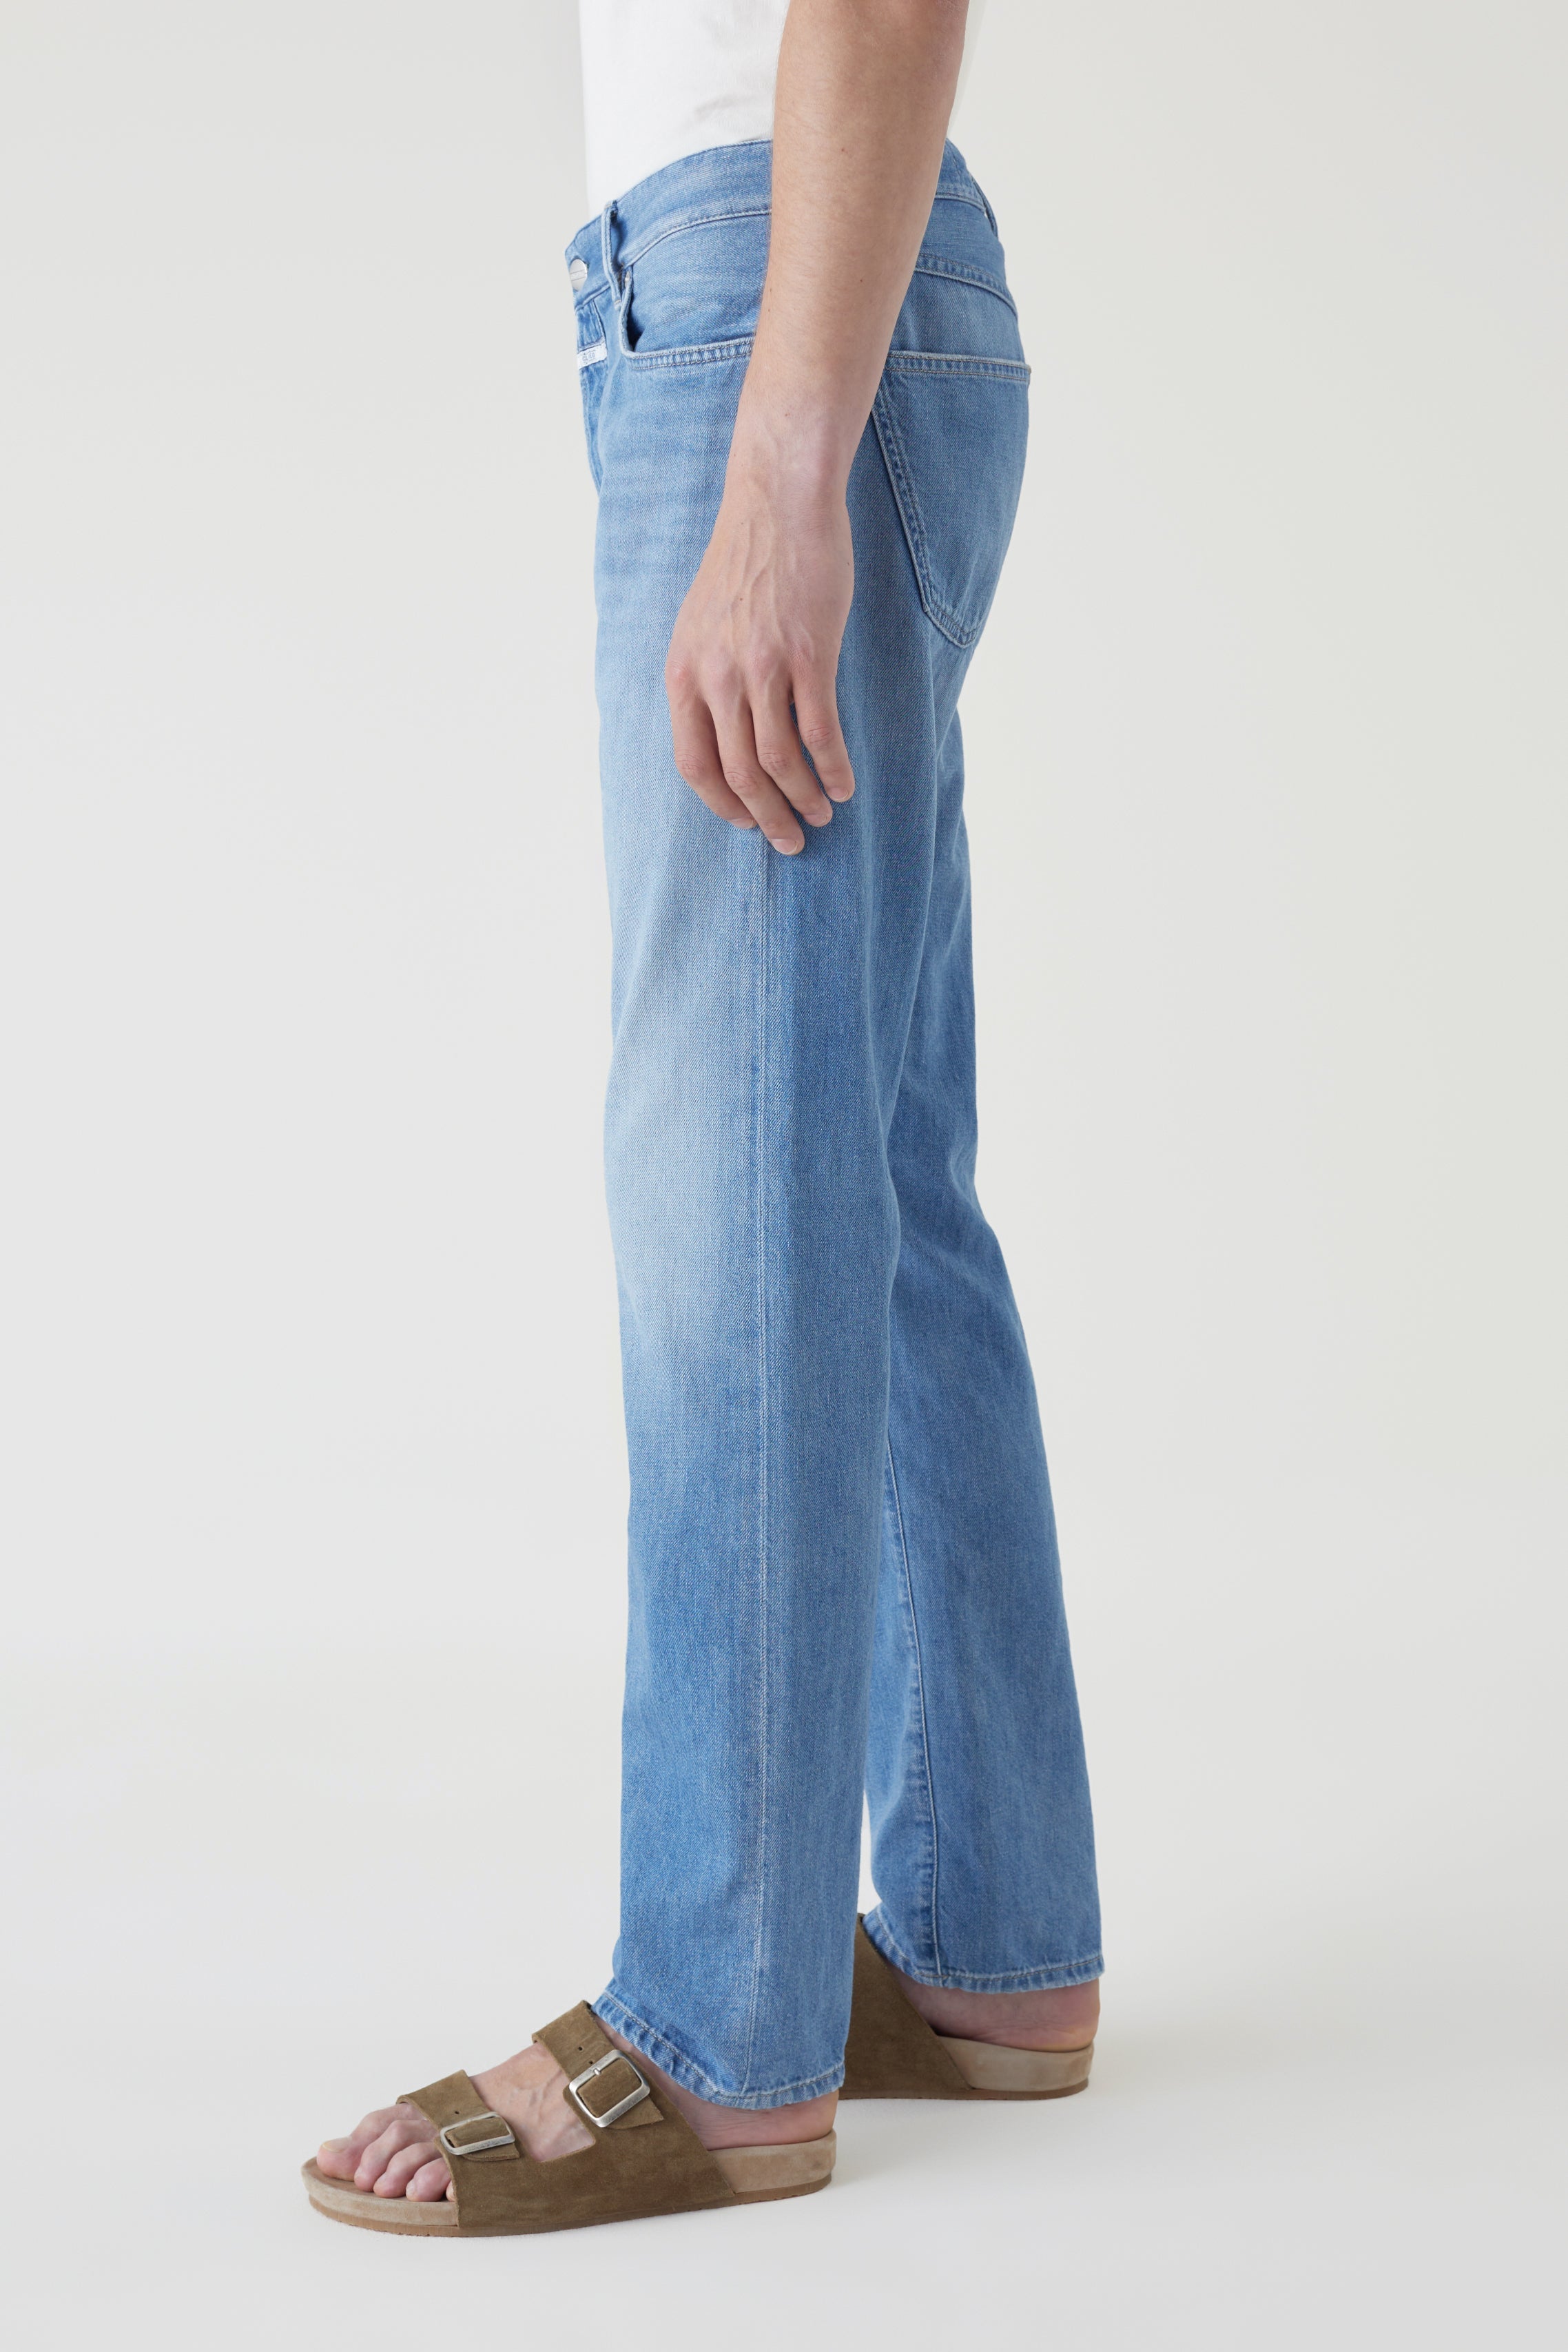 CLOSED-OUTLET-SALE-STYLE-NAME-OAKLAND-STRAIGHT-JEANS-Hosen-ARCHIVE-COLLECTION-2_fbd4c99a-c196-4caf-a45e-7cc0861a40c8.jpg